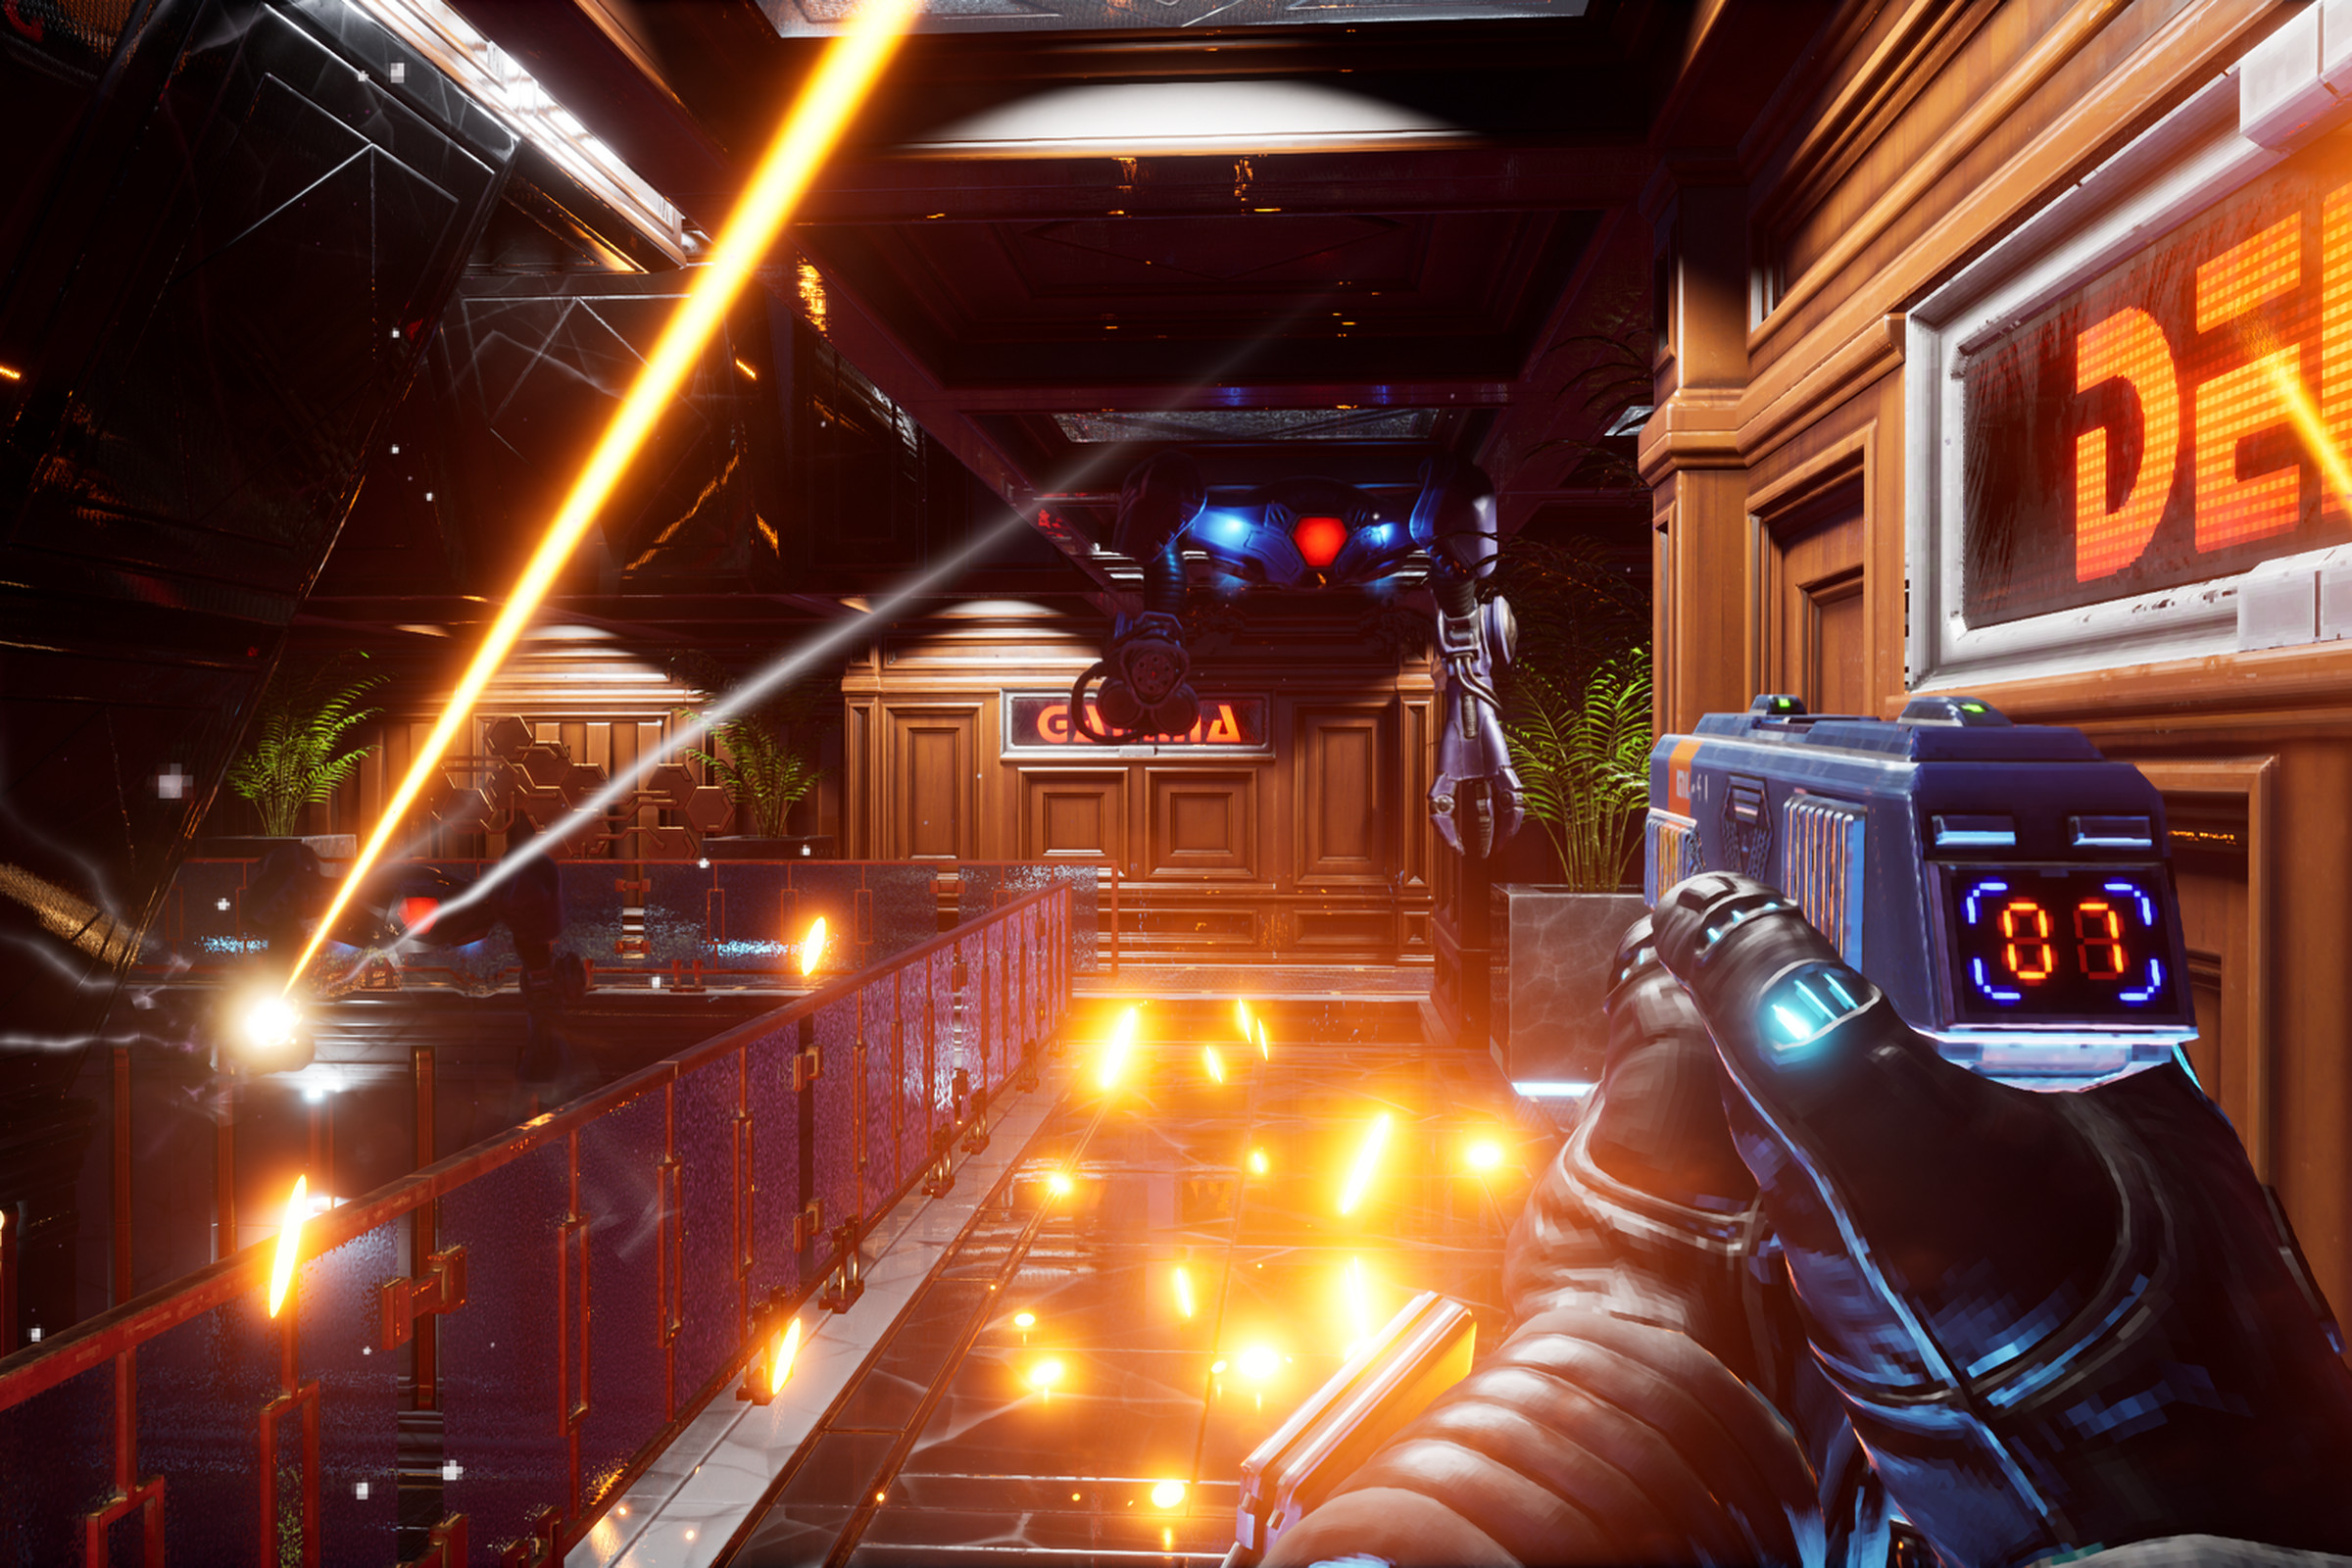 A first-person shooter screenshot of a hand holding a gun in a corridor filled with orange lights and particle effects.